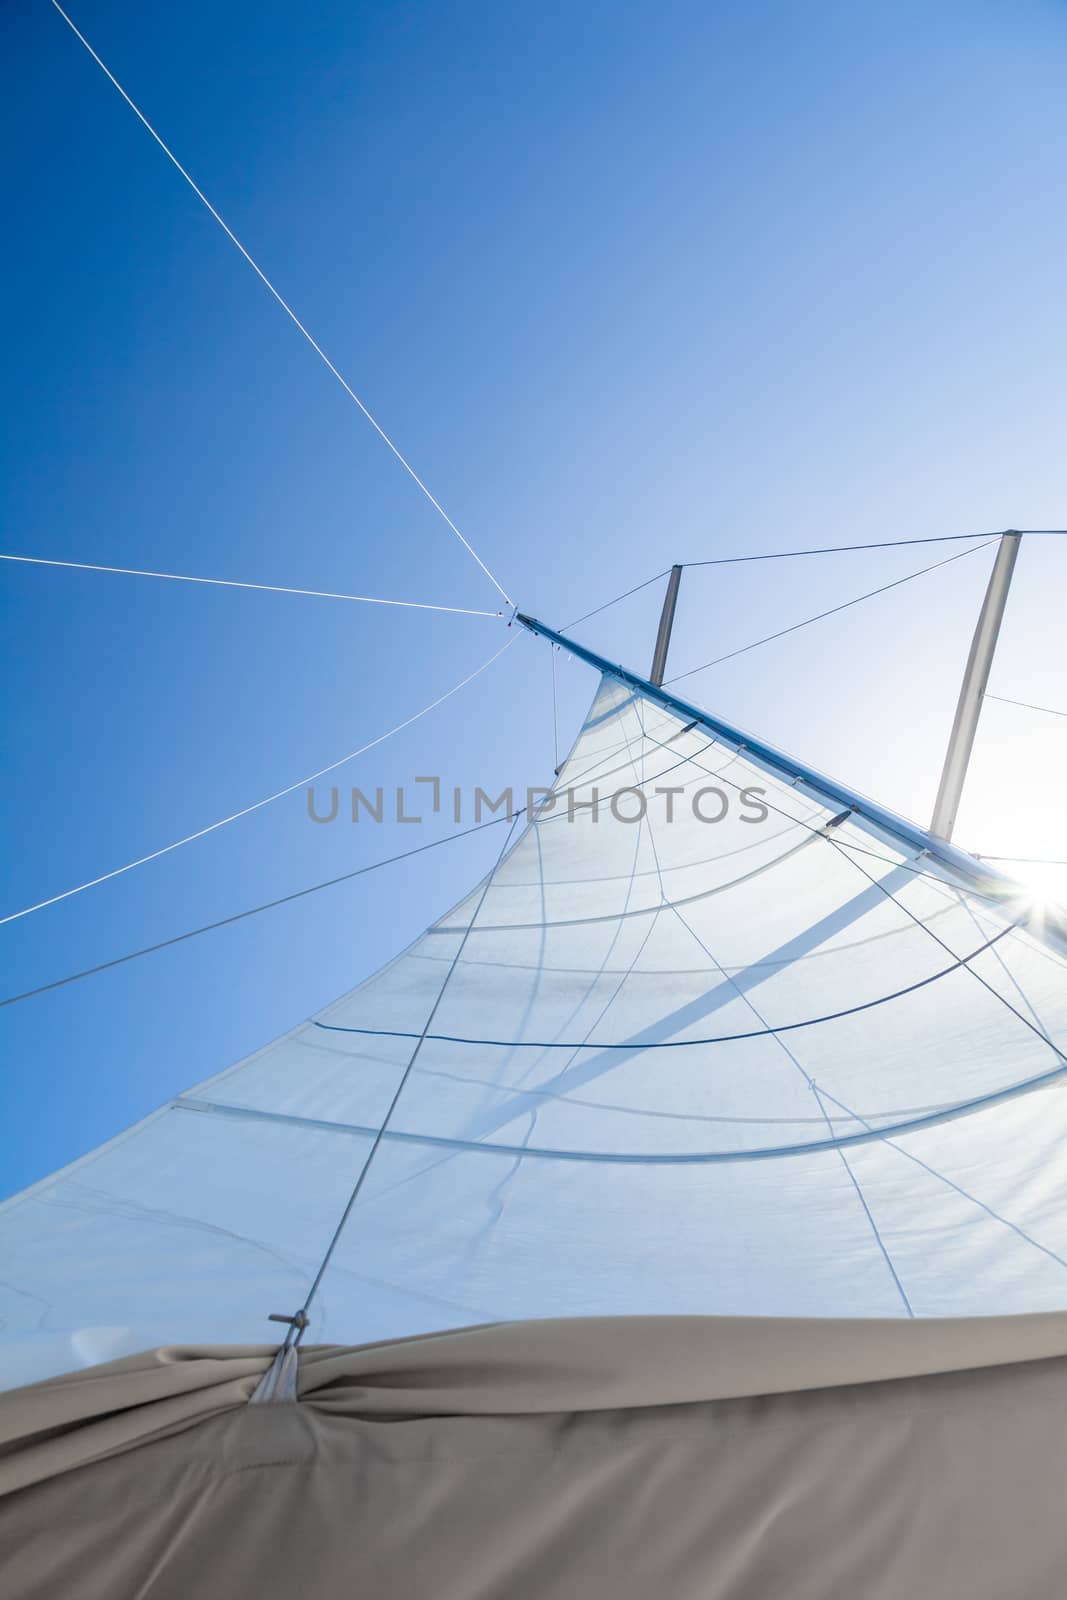 An image of a Sailing boat sails background